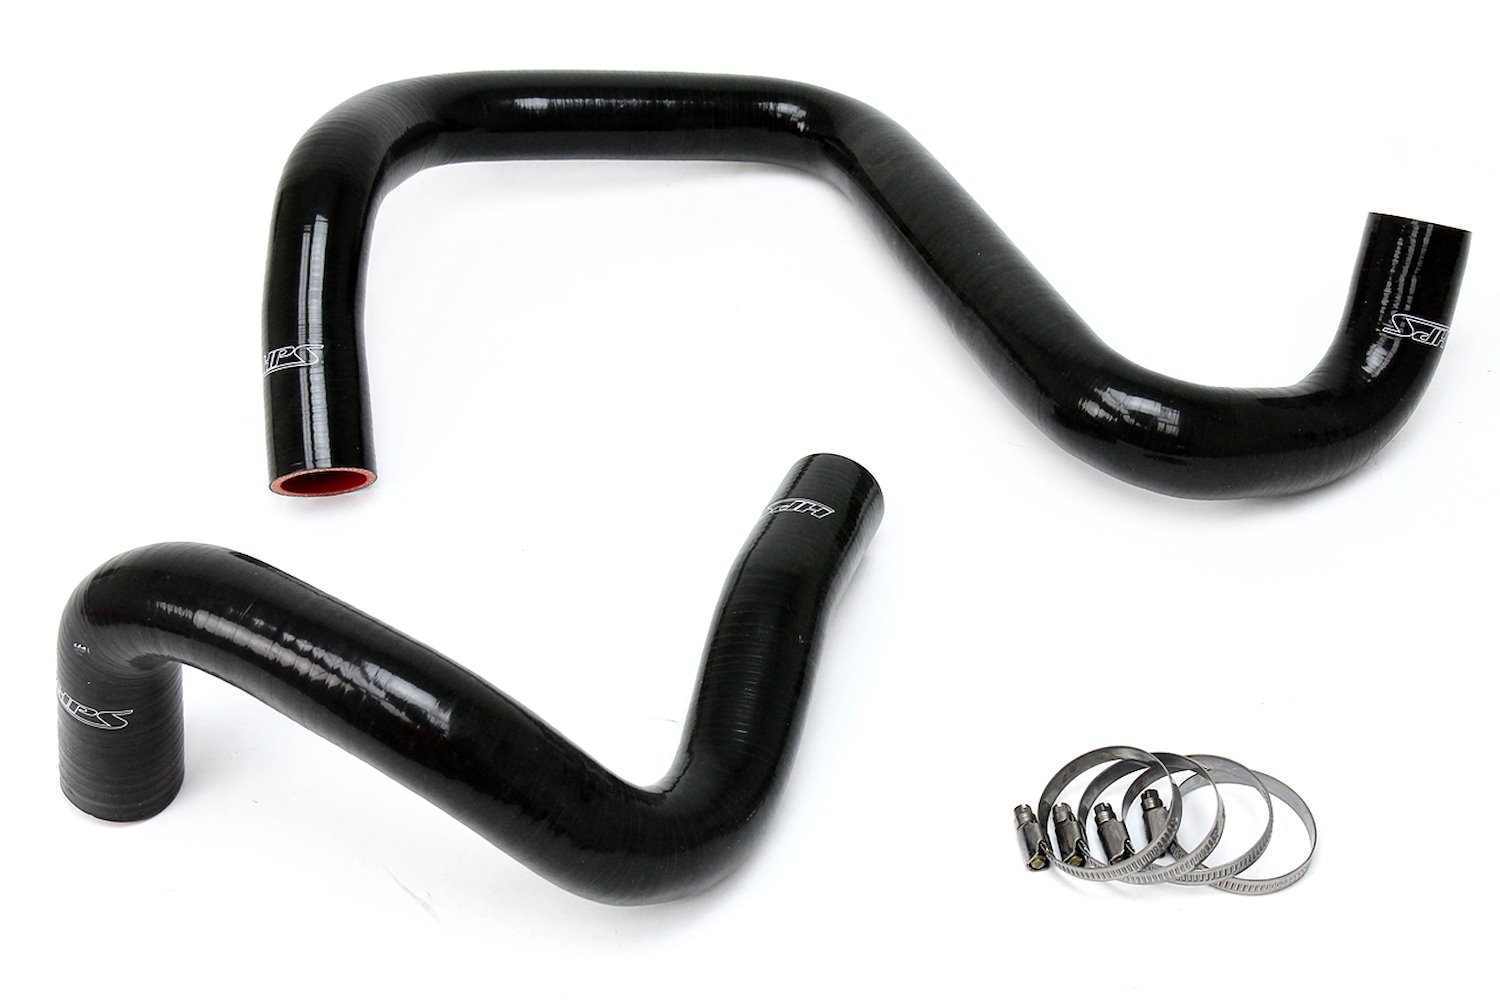 57-1285R-BLK Radiator Hose Kit, High-Temp 3-Ply Reinforced Silicone, Replace OEM Rubber Radiator Coolant Hoses